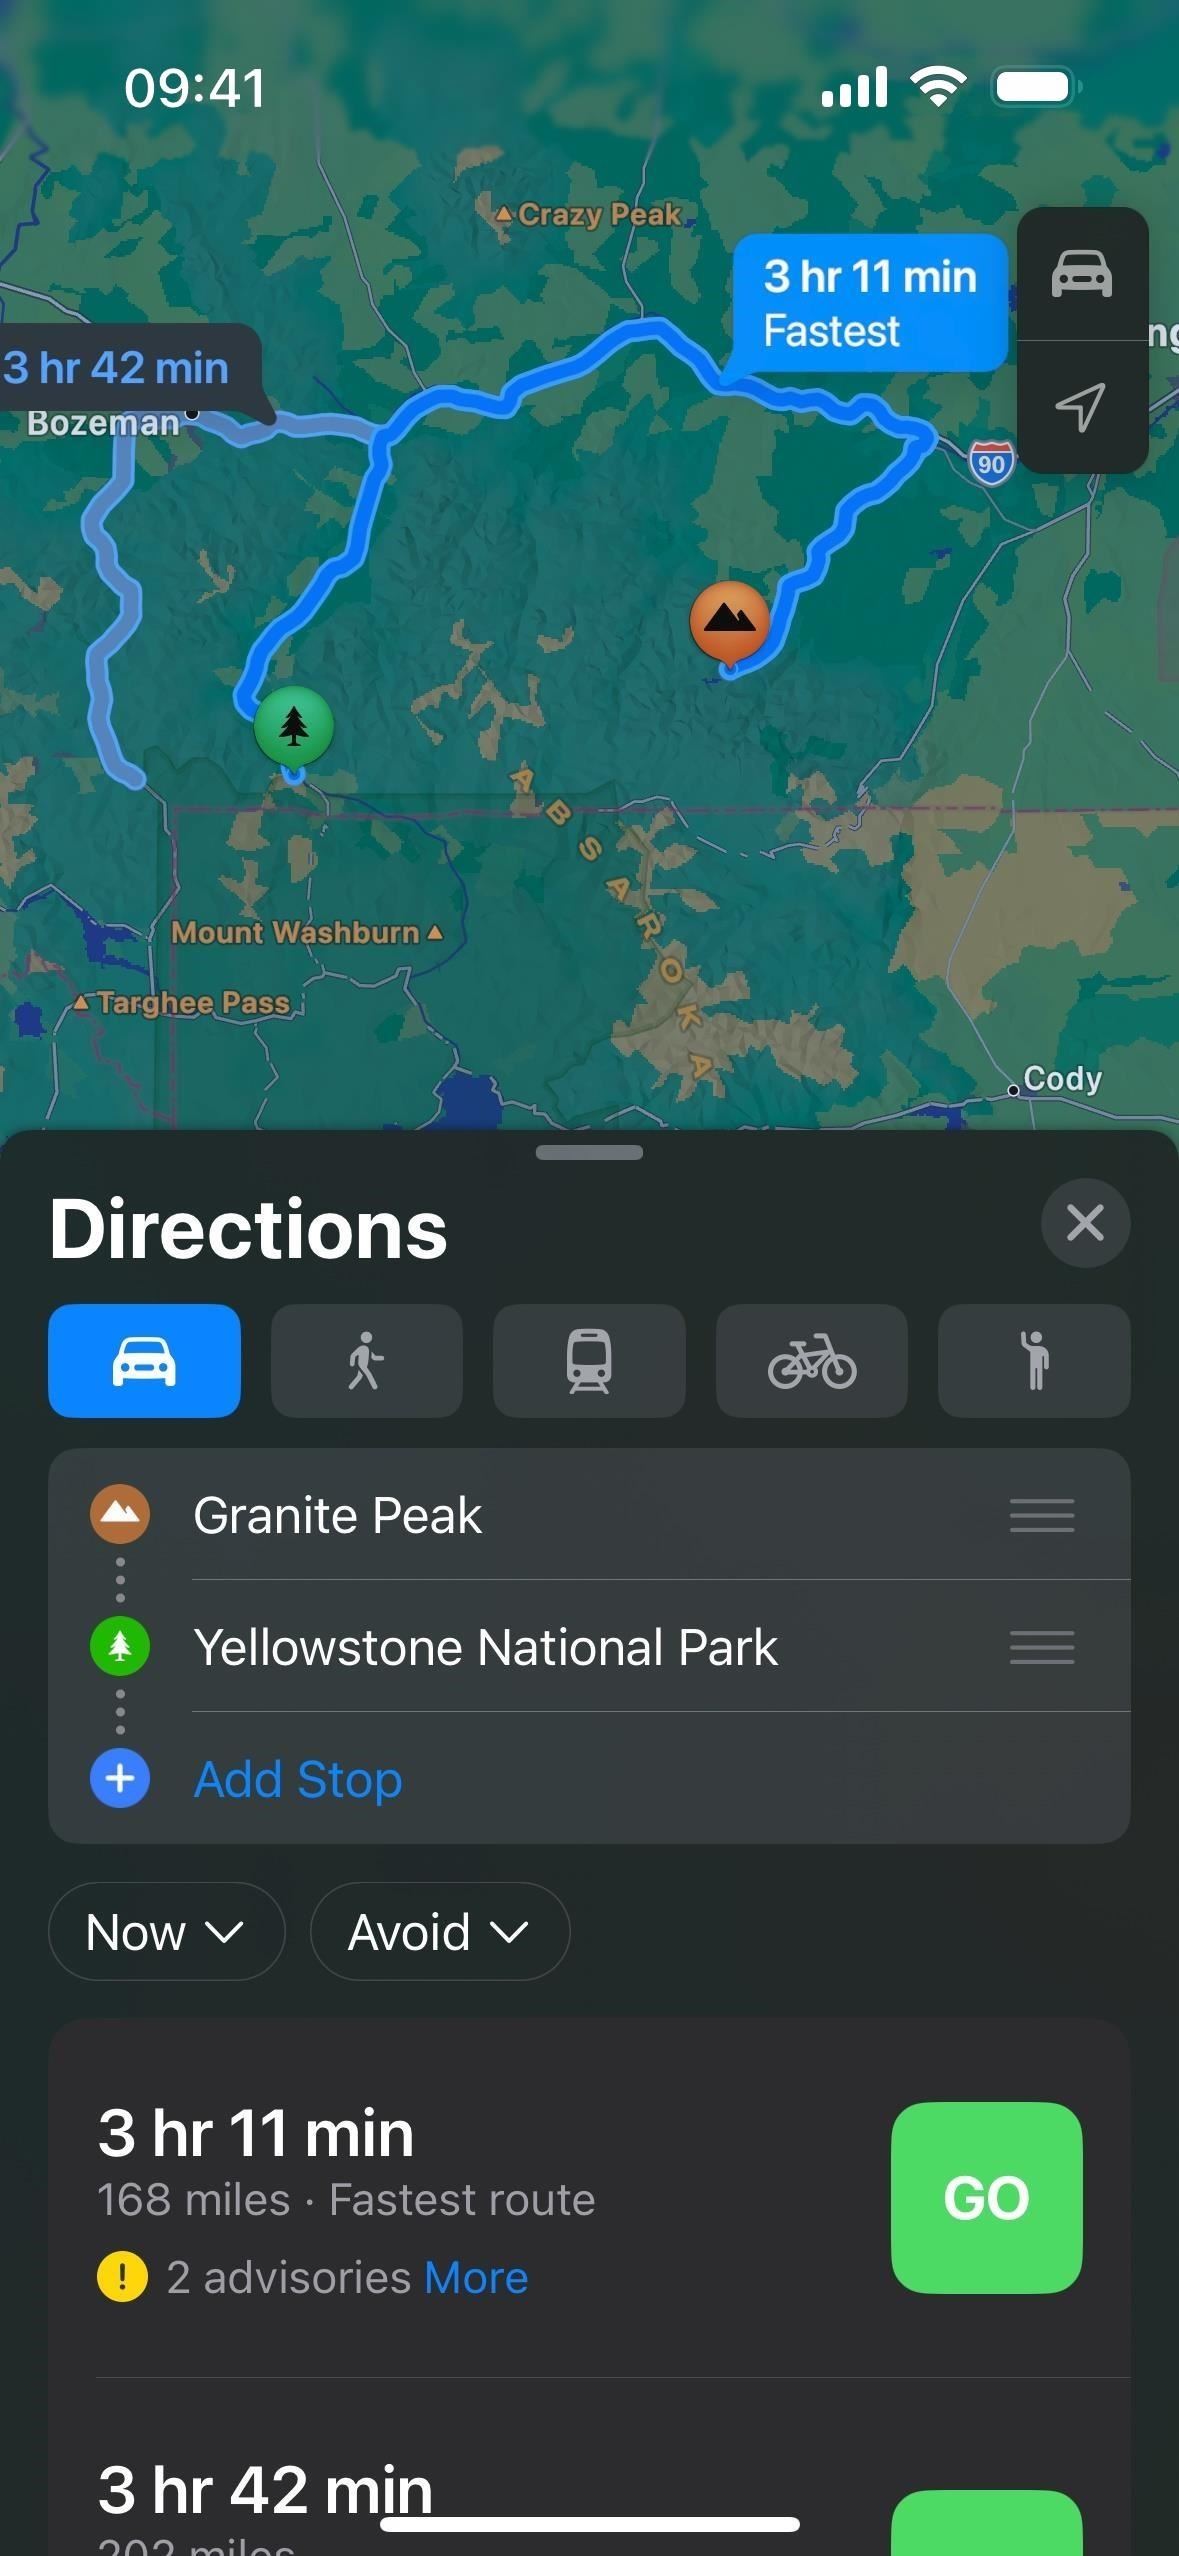 9 New Features in Apple Maps That'll Make Navigating on Your iPhone a Breeze